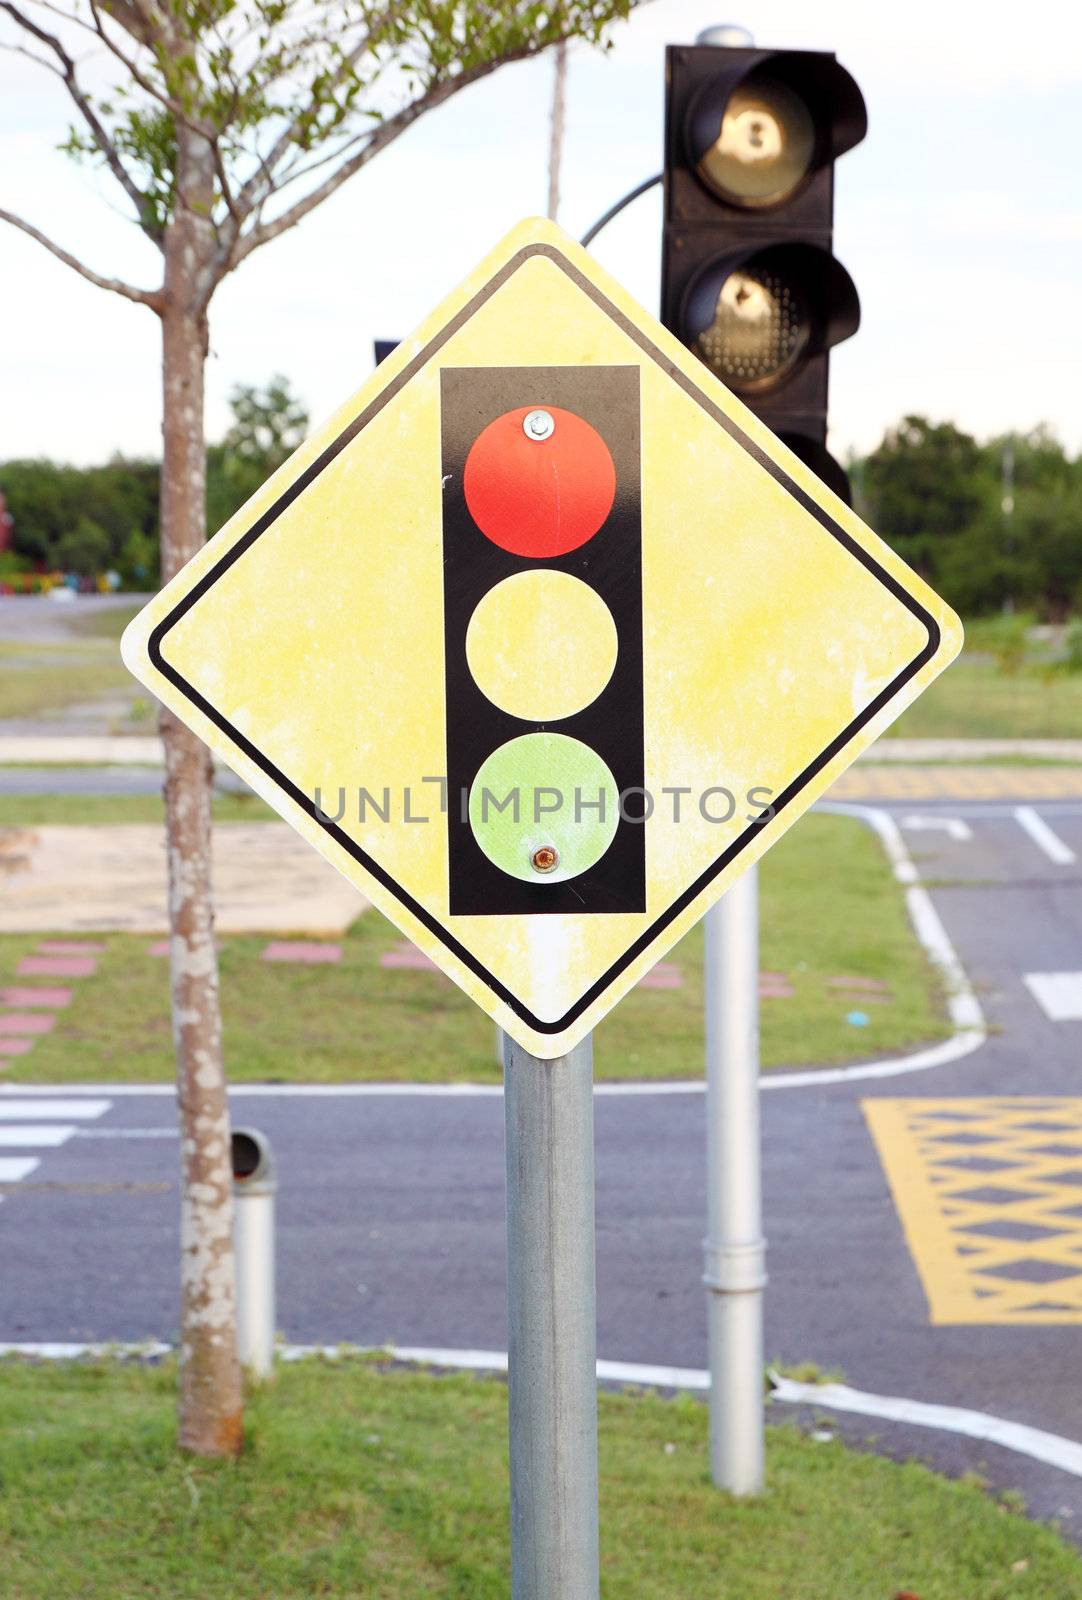 A road sign warning of a traffic light ahead